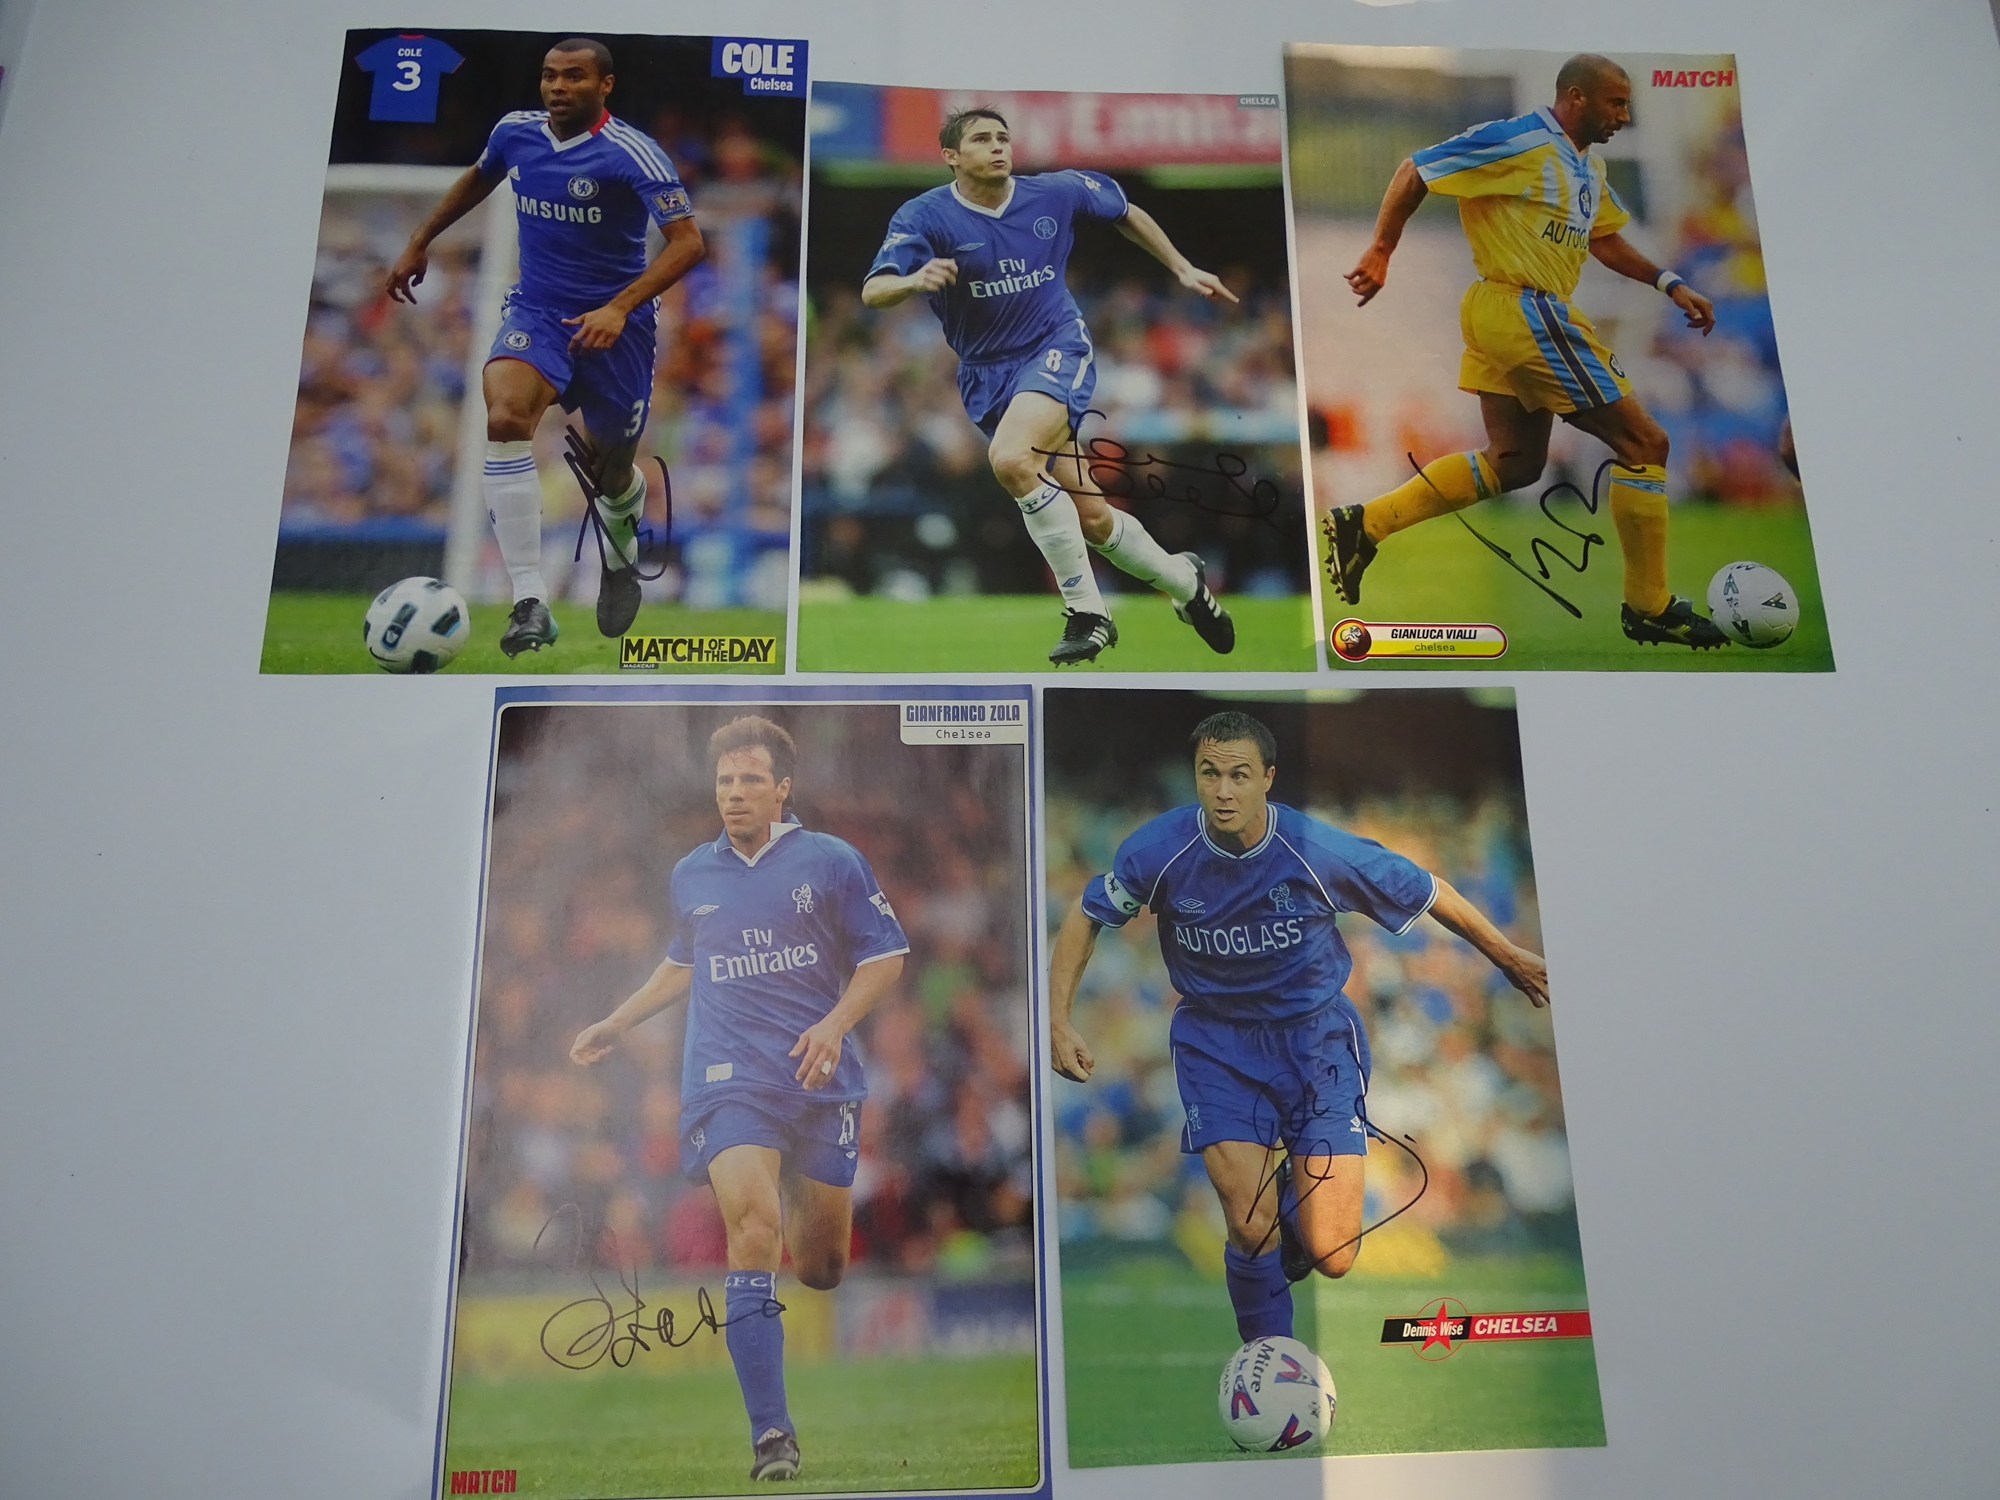 AUTOGRAPHS: 1990S/2000S FOOTBALLERS - CHELSEA FOOTBALL CLUB: A selection of 5 autographed